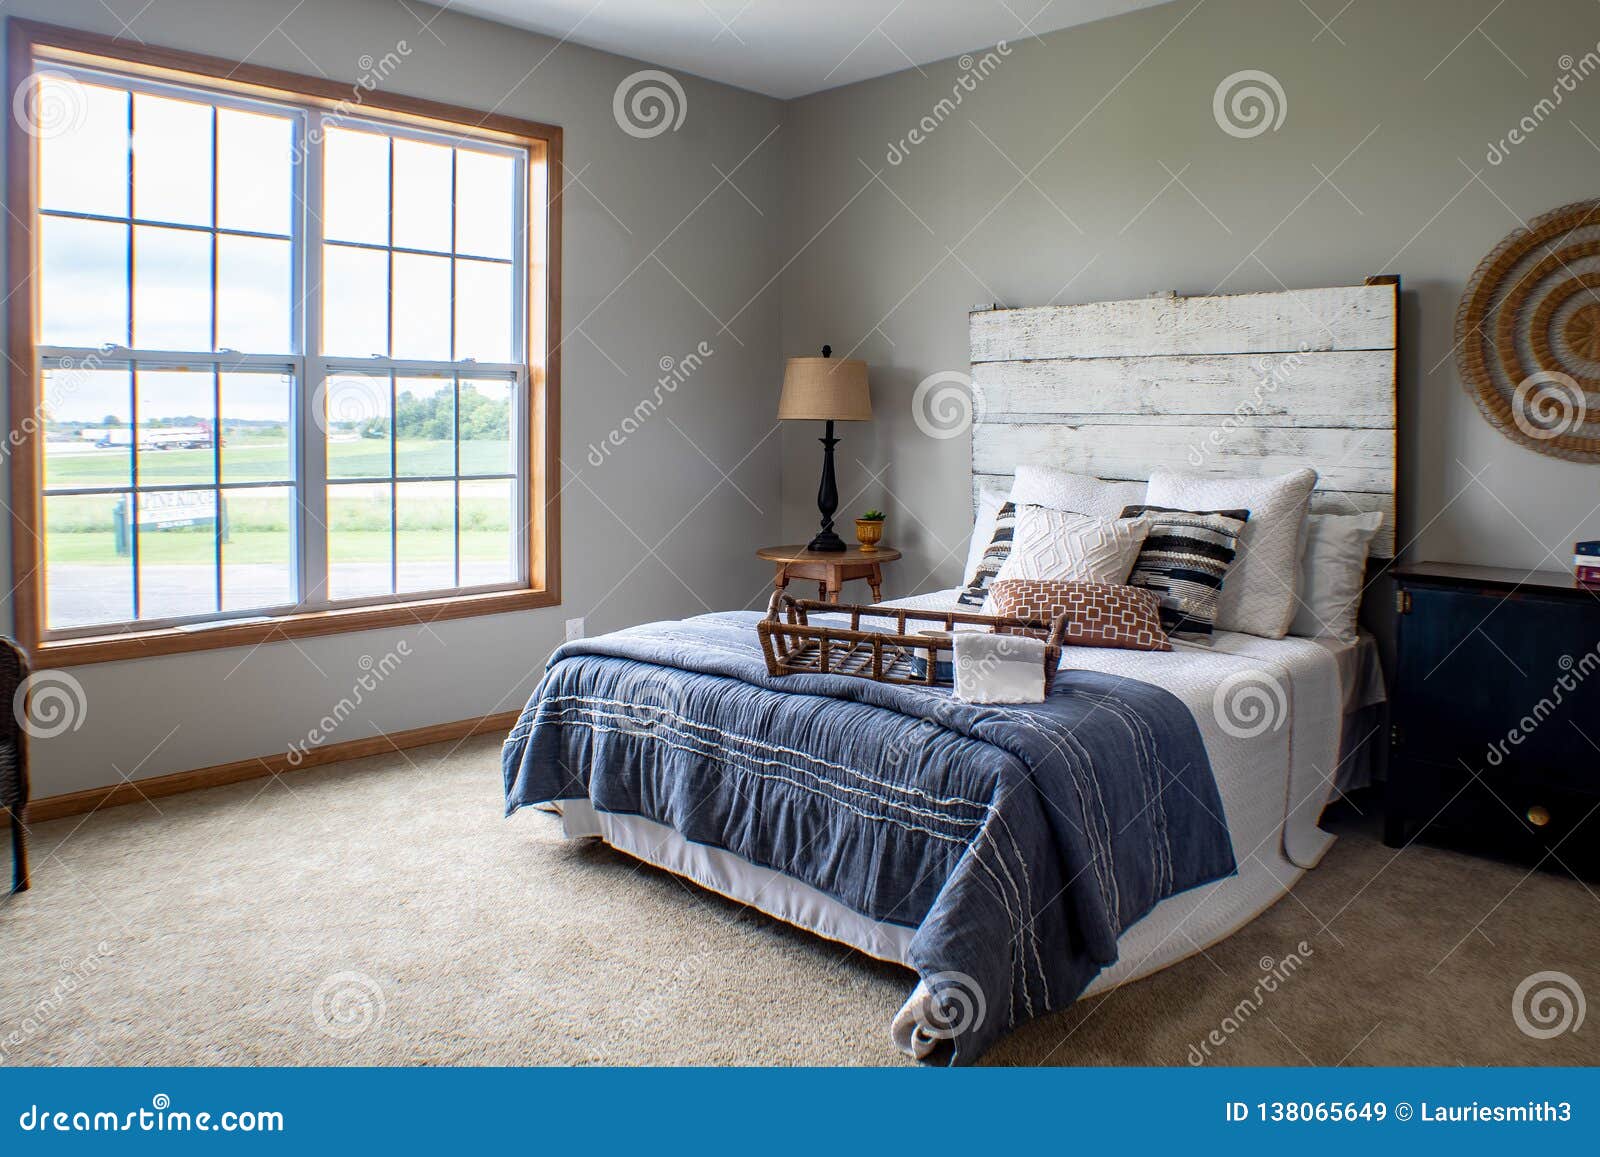 Cozy Master Bedroom On A Cold Winter S Day Stock Image